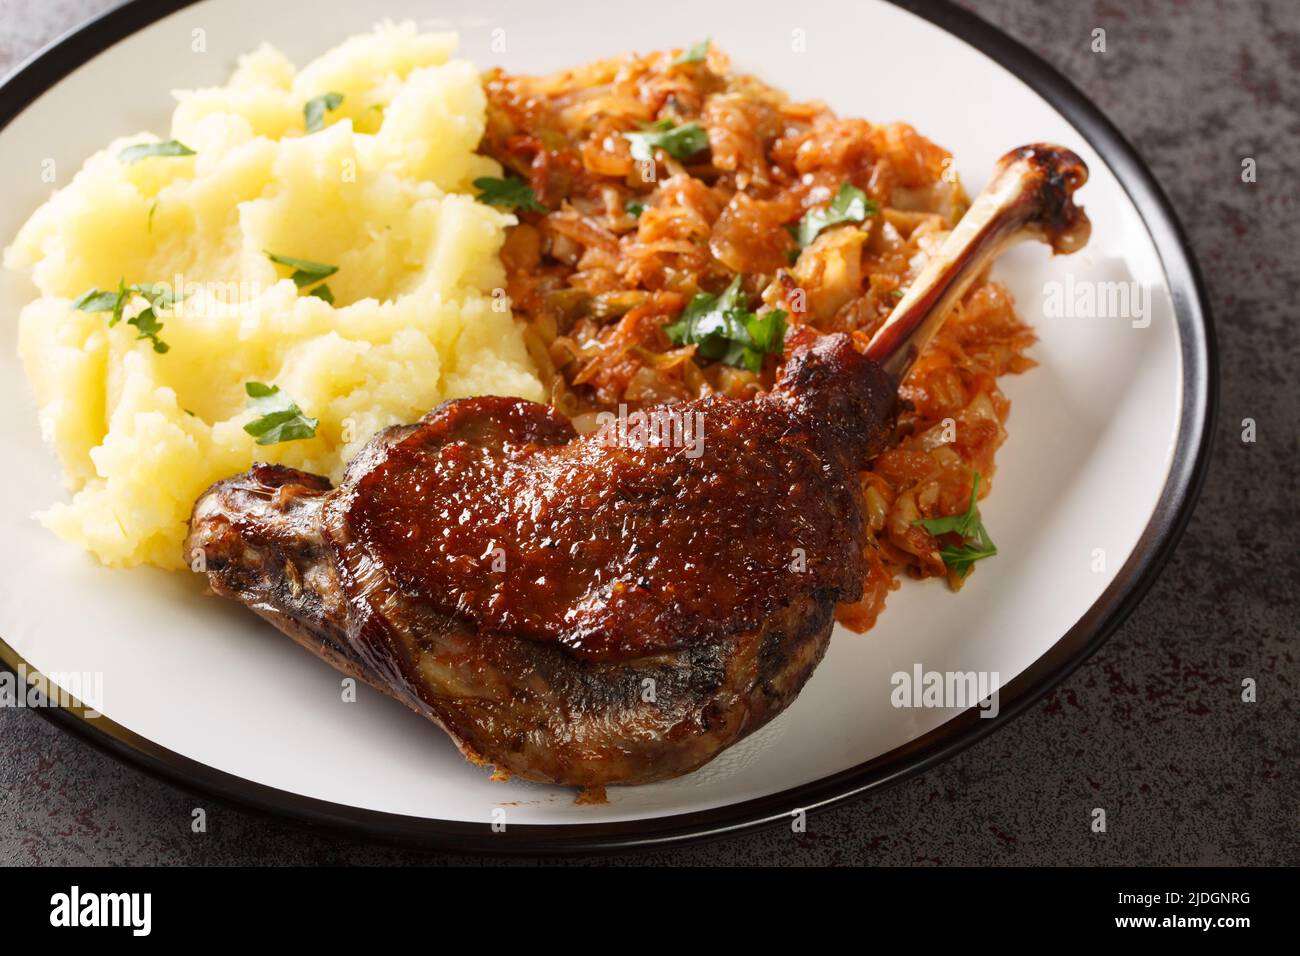 Romanian food duck leg with stewed cabbage and mashed potatoes close-up in a plate on the table. horizontal Stock Photo